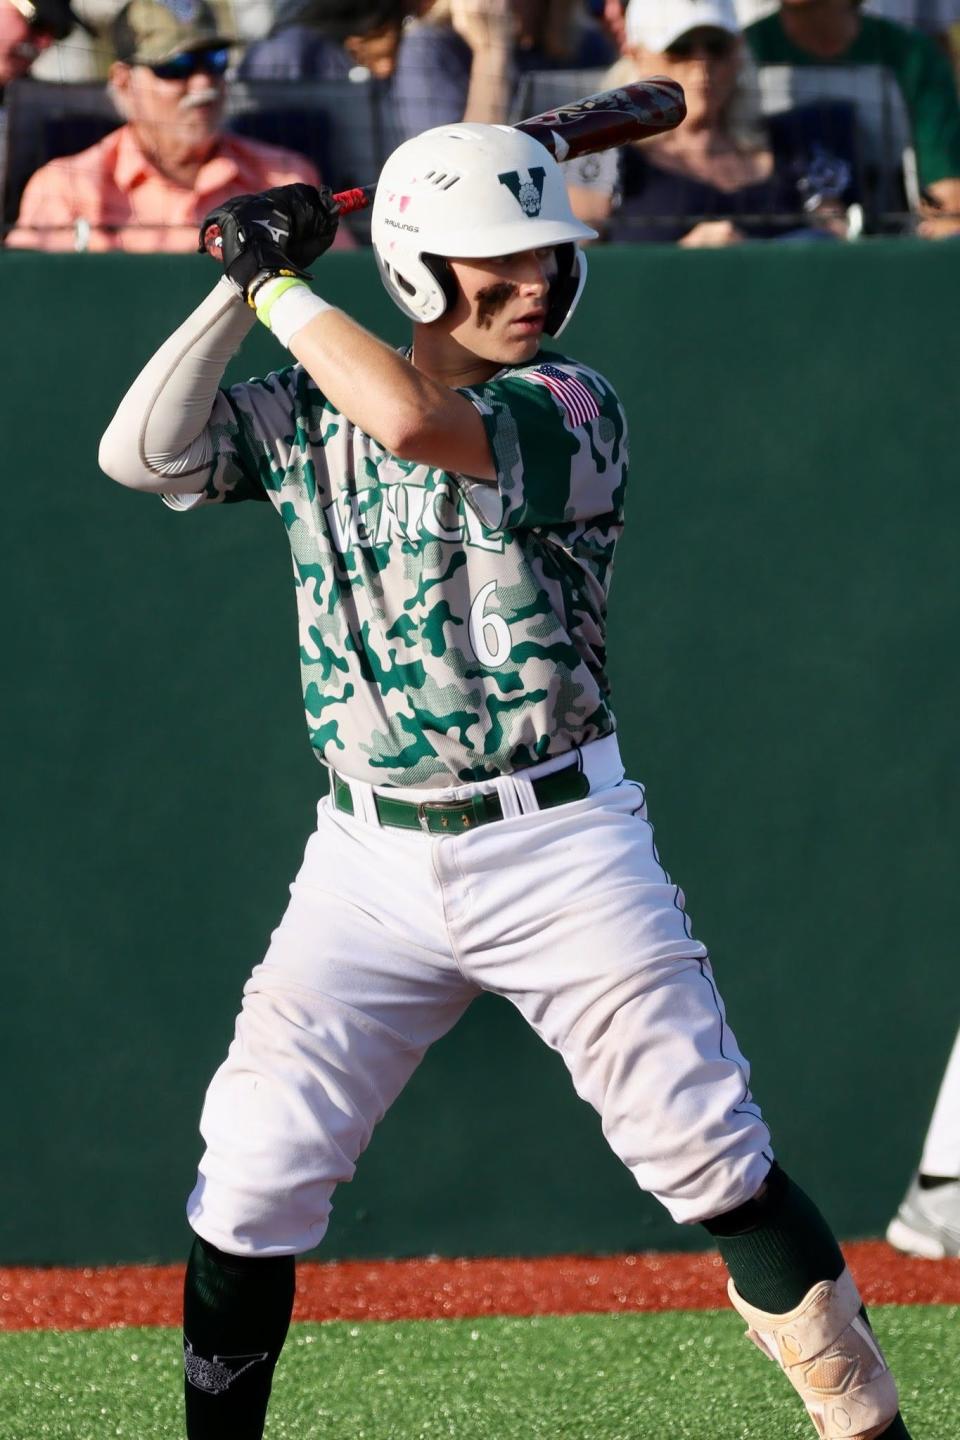 The sophomore Dunn hit .325 for Venice last season. His 13 hits tied for the team high, as did his 9 RBI.